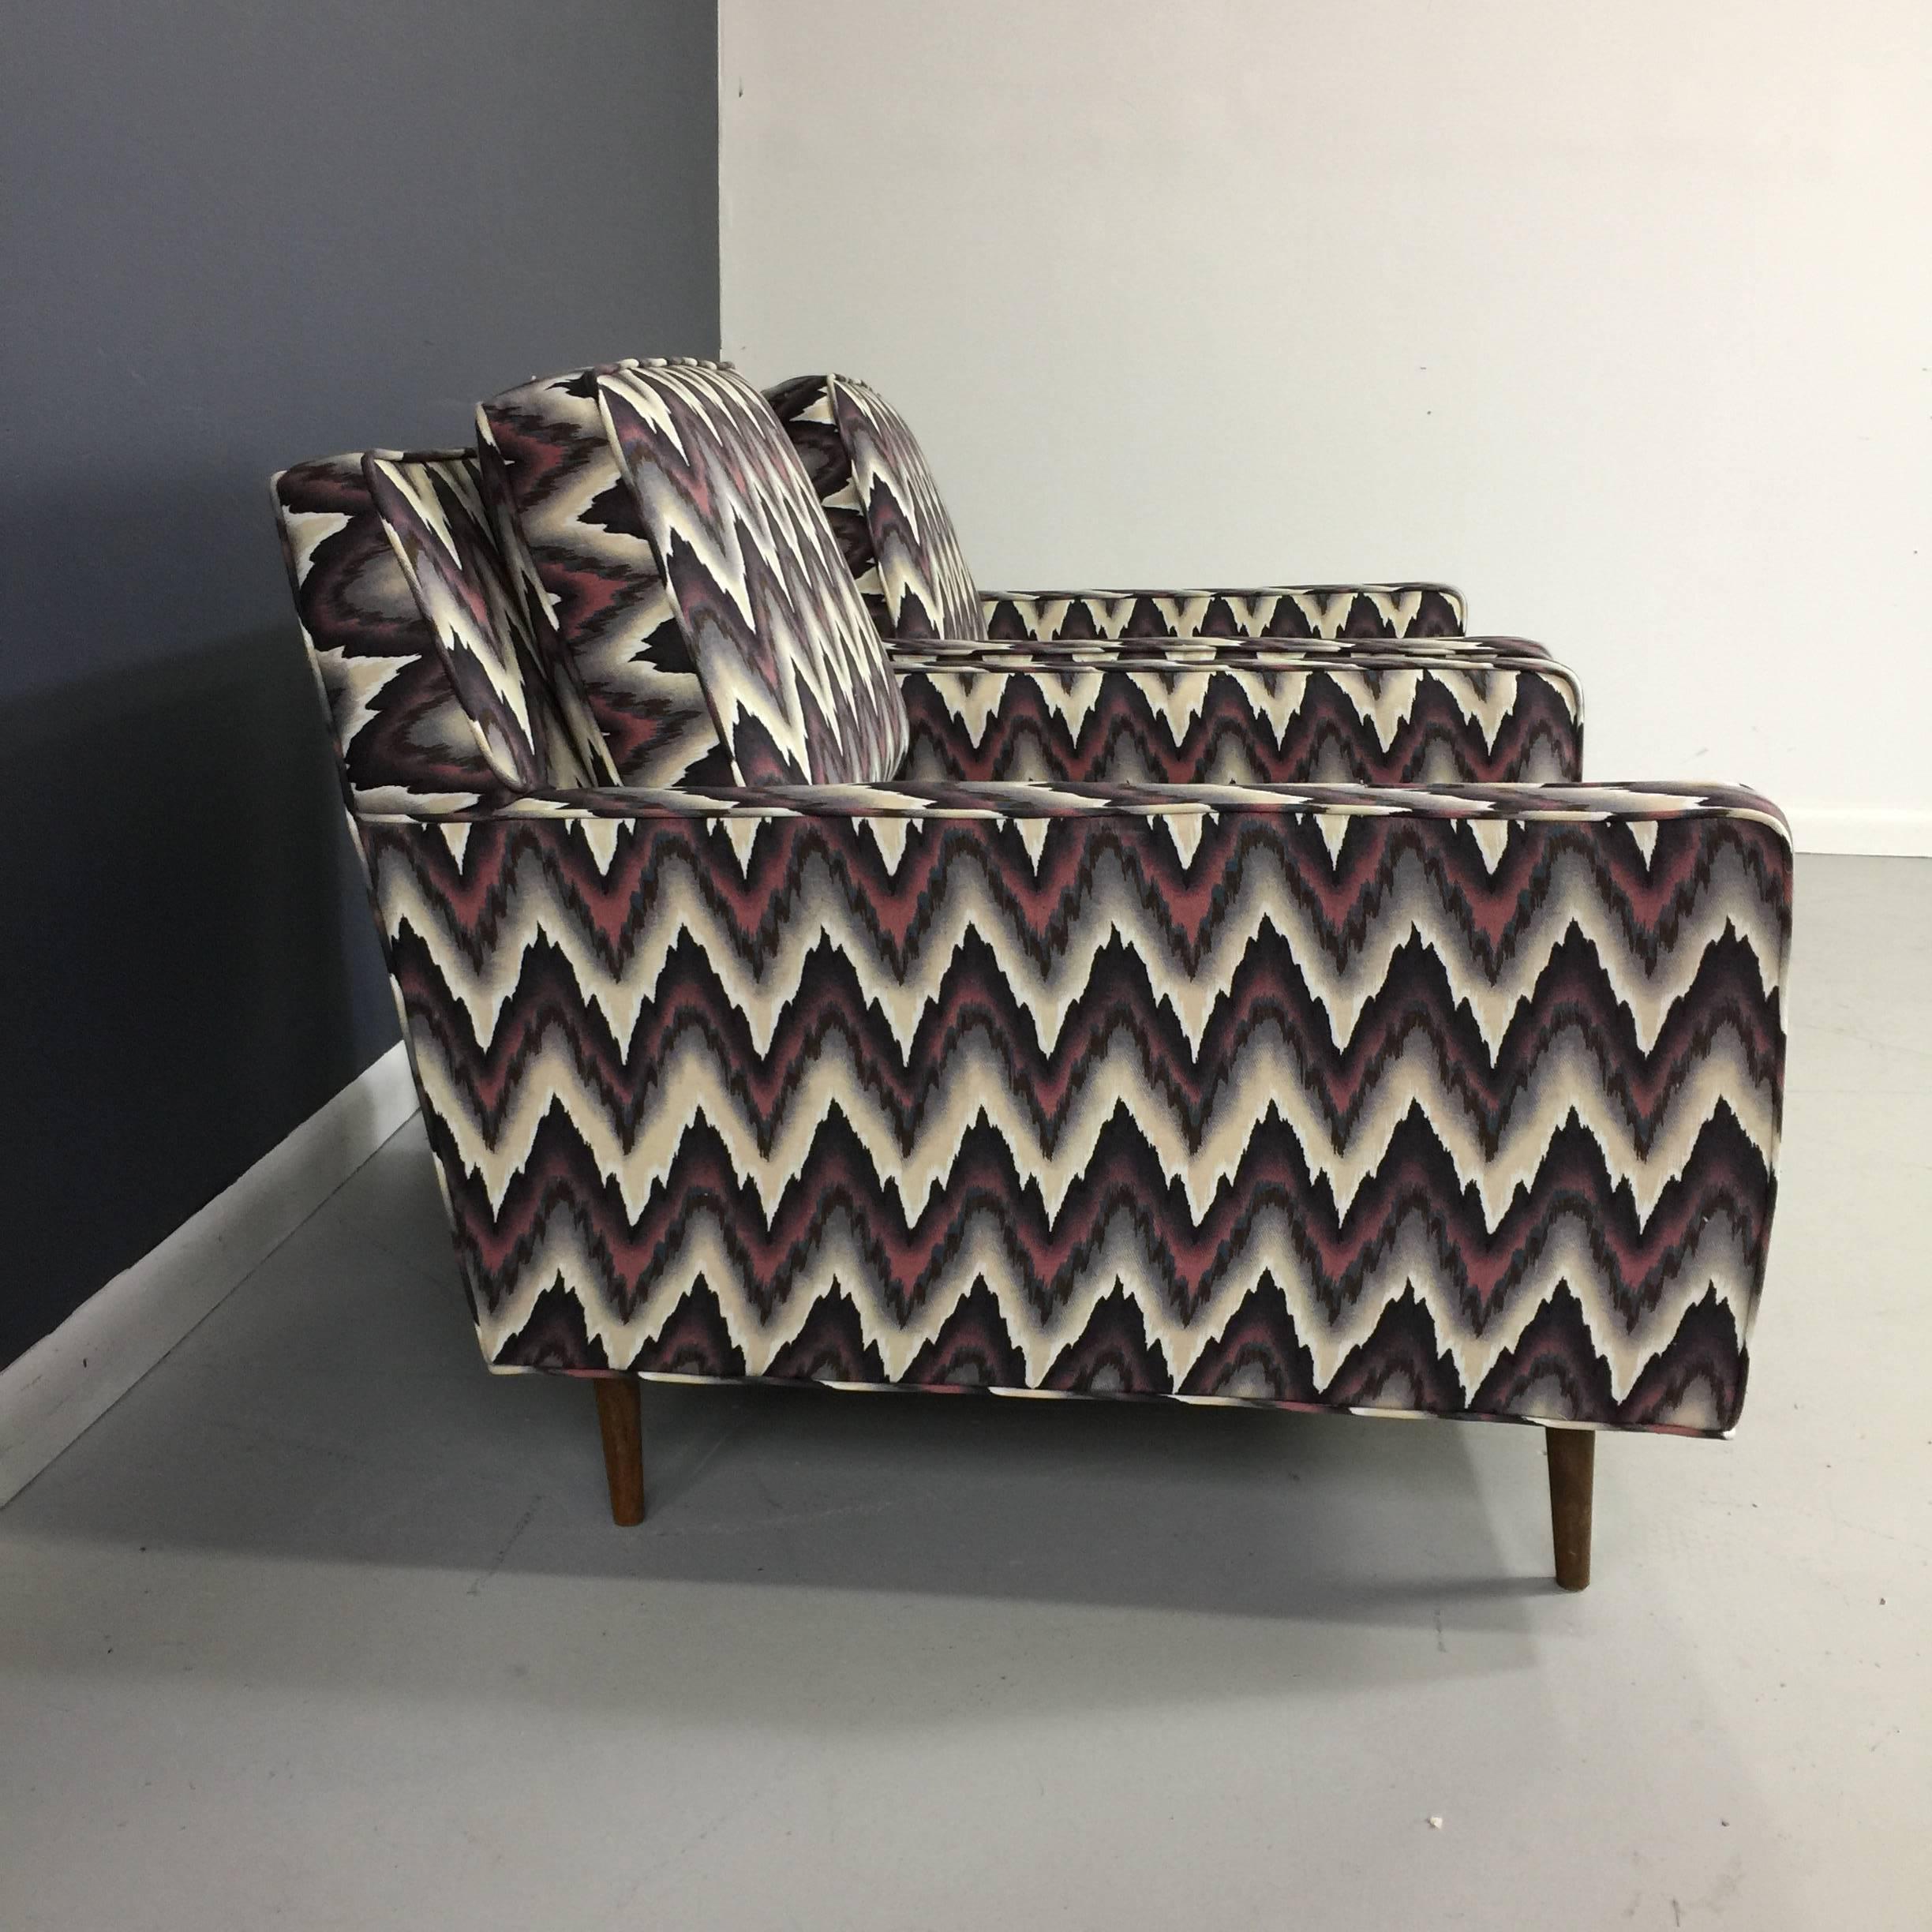 Description these 1960s cube chairs have been lovingly restored and upholstered in vintage 1980s fabric that mimics bargello flamestitch. Fabric is white, mauve pink purple, blue, grey and black. Measure: Seats are 18 high. Legs are walnut.